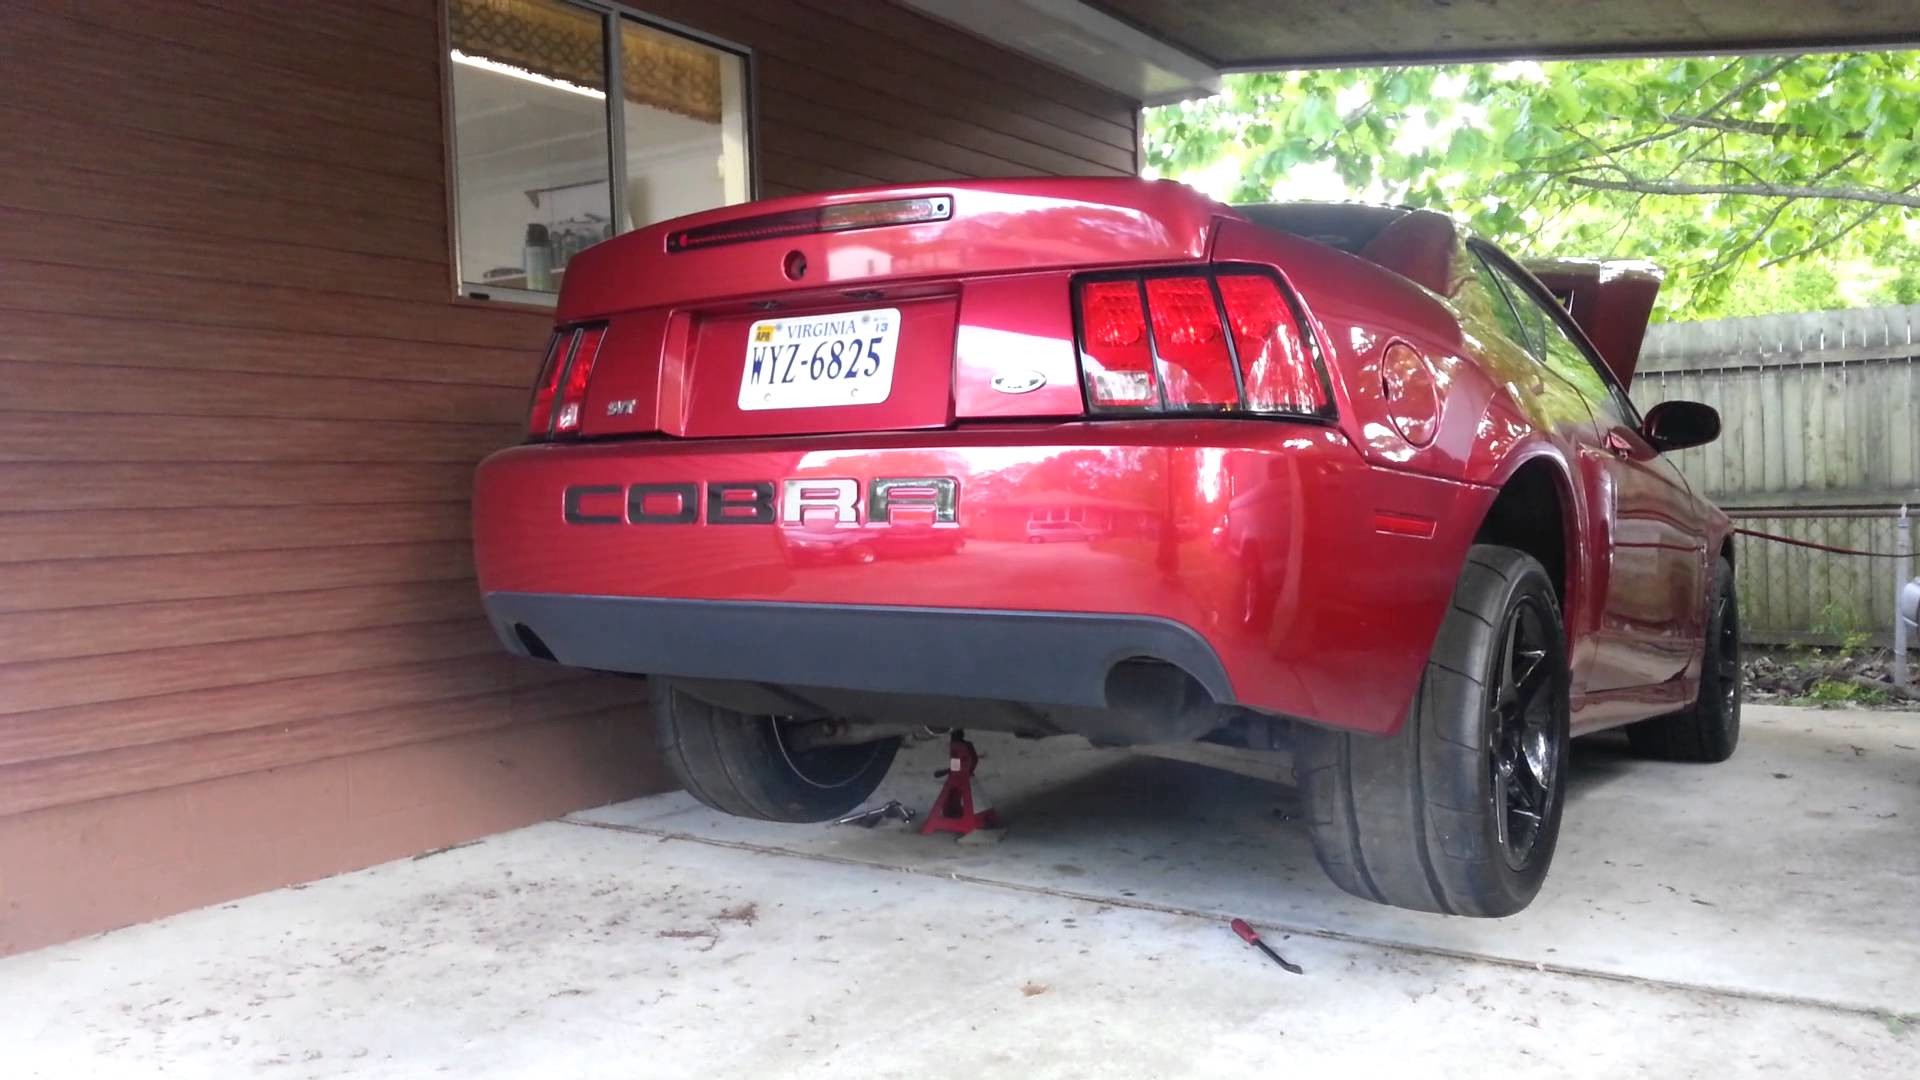 1920x1080 04 cobra no cat back only cated bbk xpipe